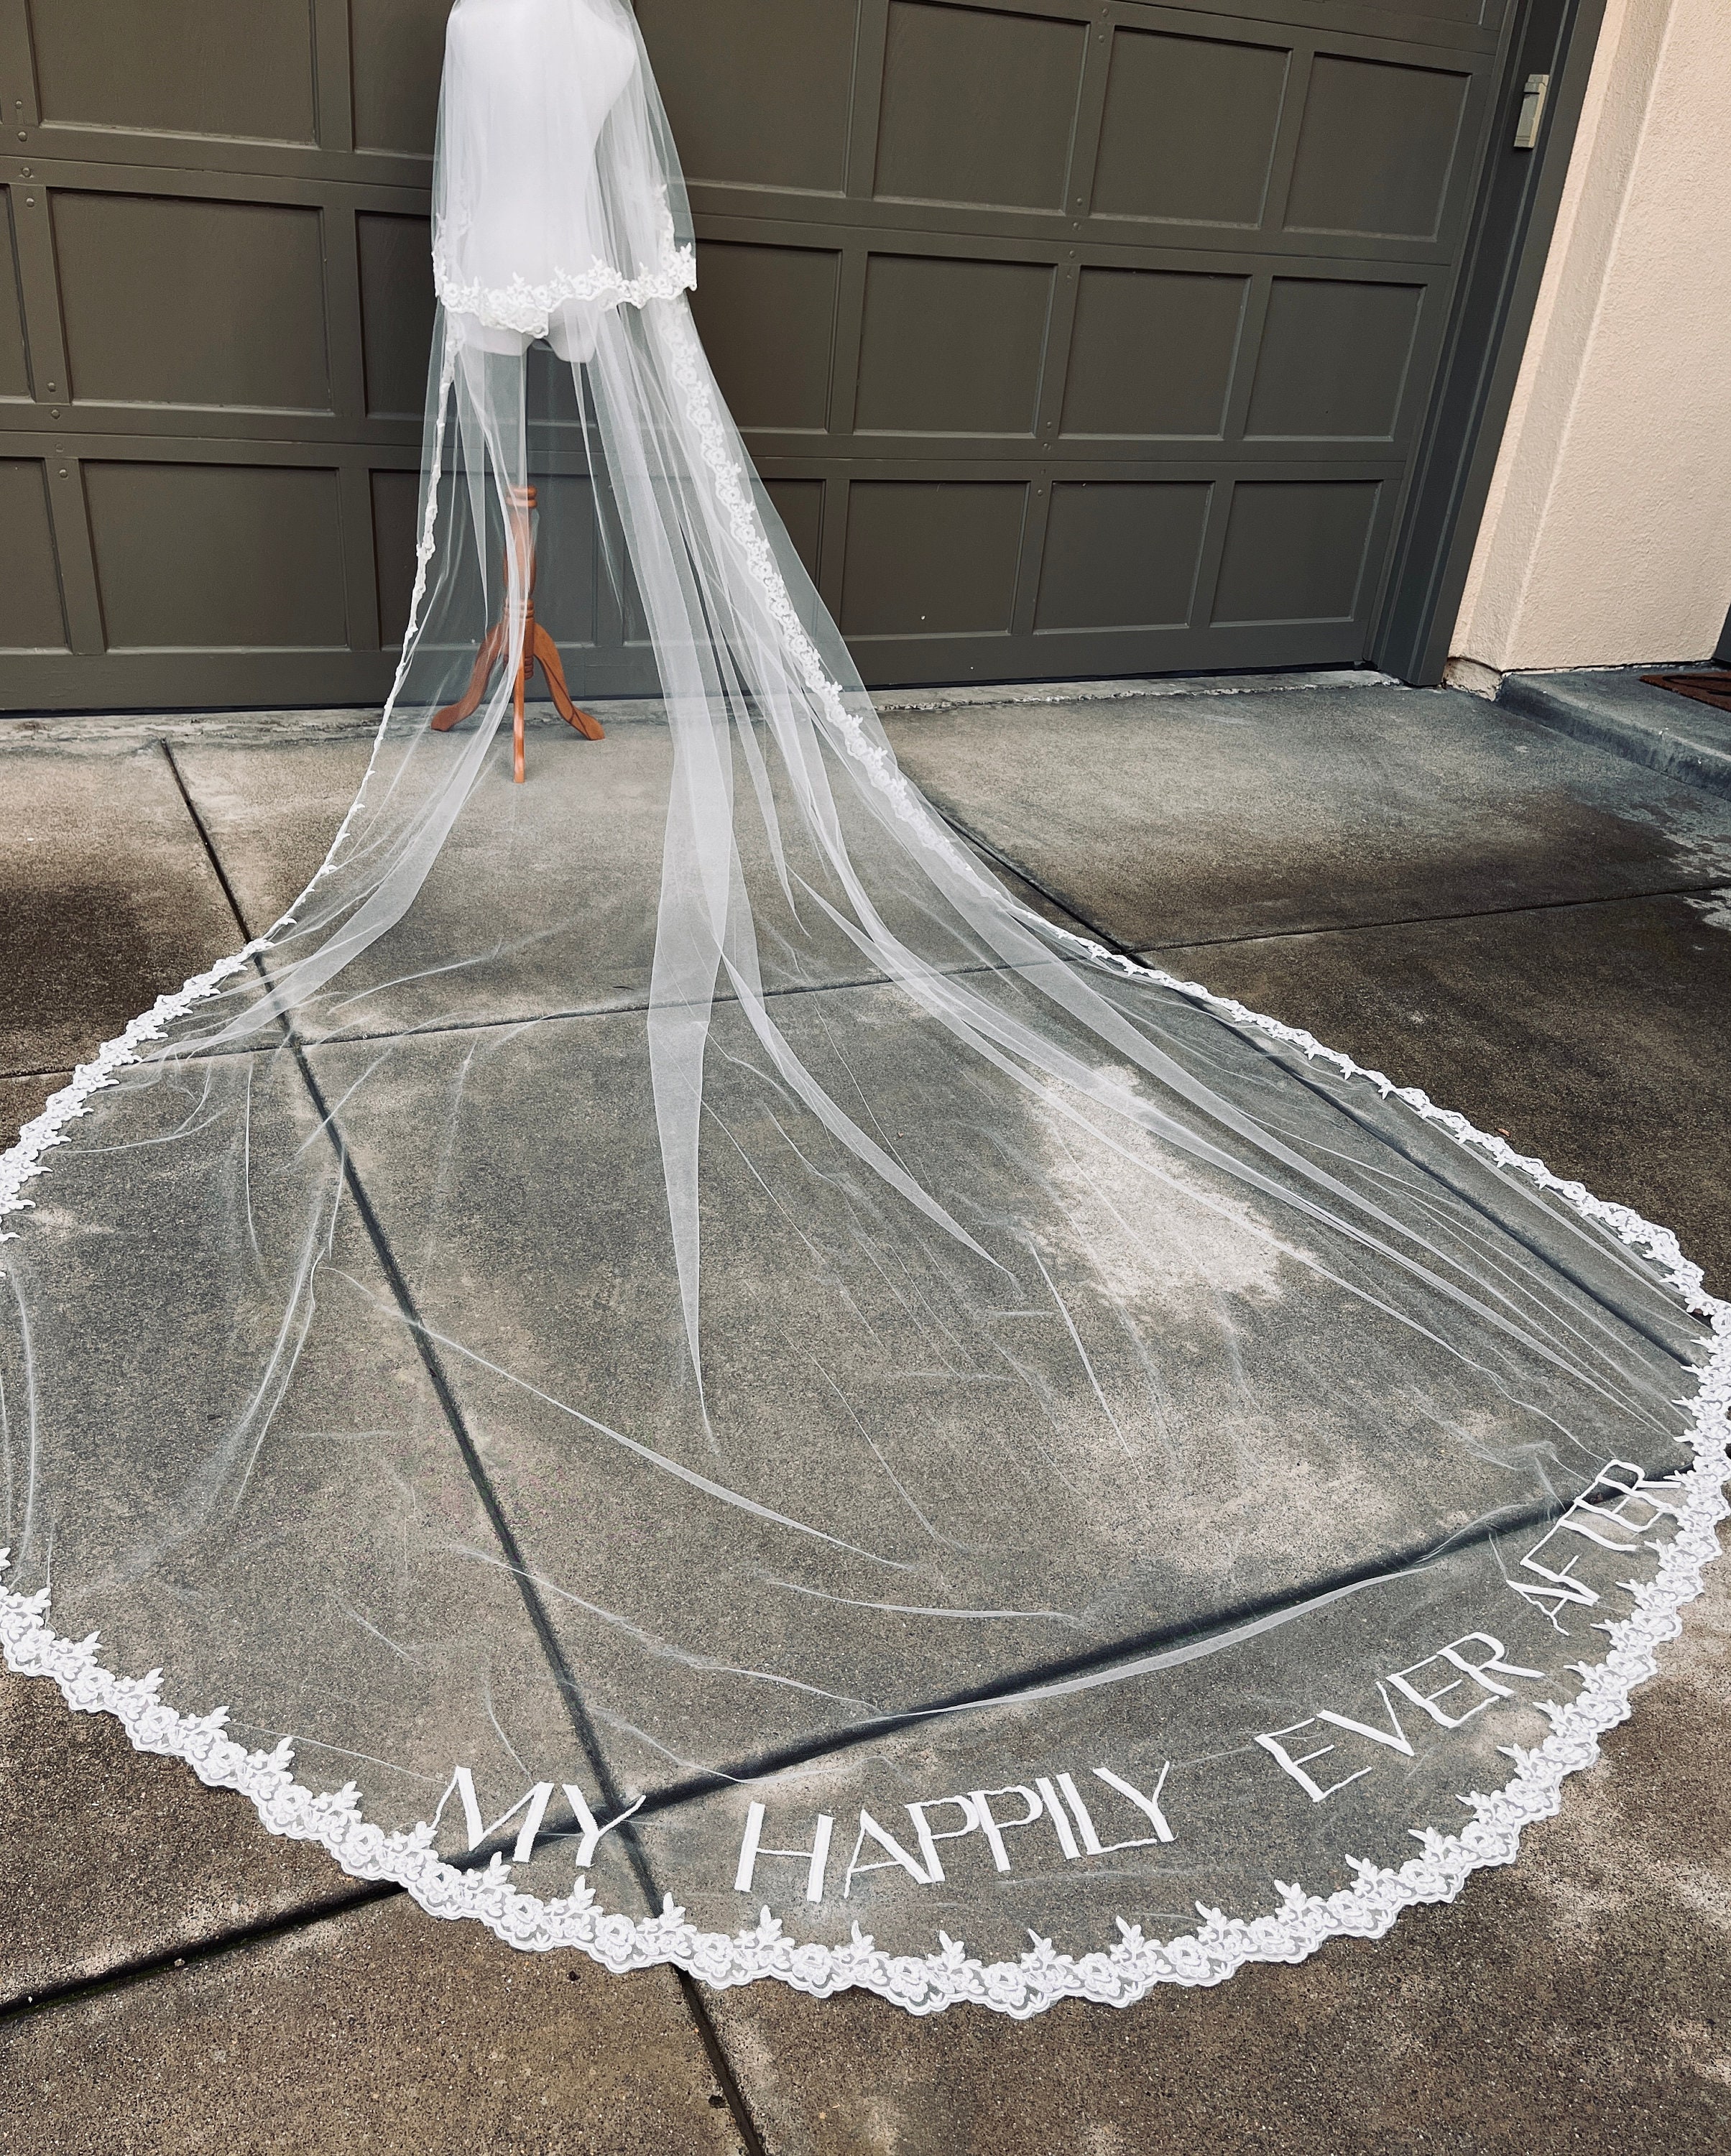 Hailey Bieber Embroidered Phrase Wedding Veil Custom Lace Bridal Veil with  Words Cathedral Veil Dramatic with Name Love Quote - AliExpress